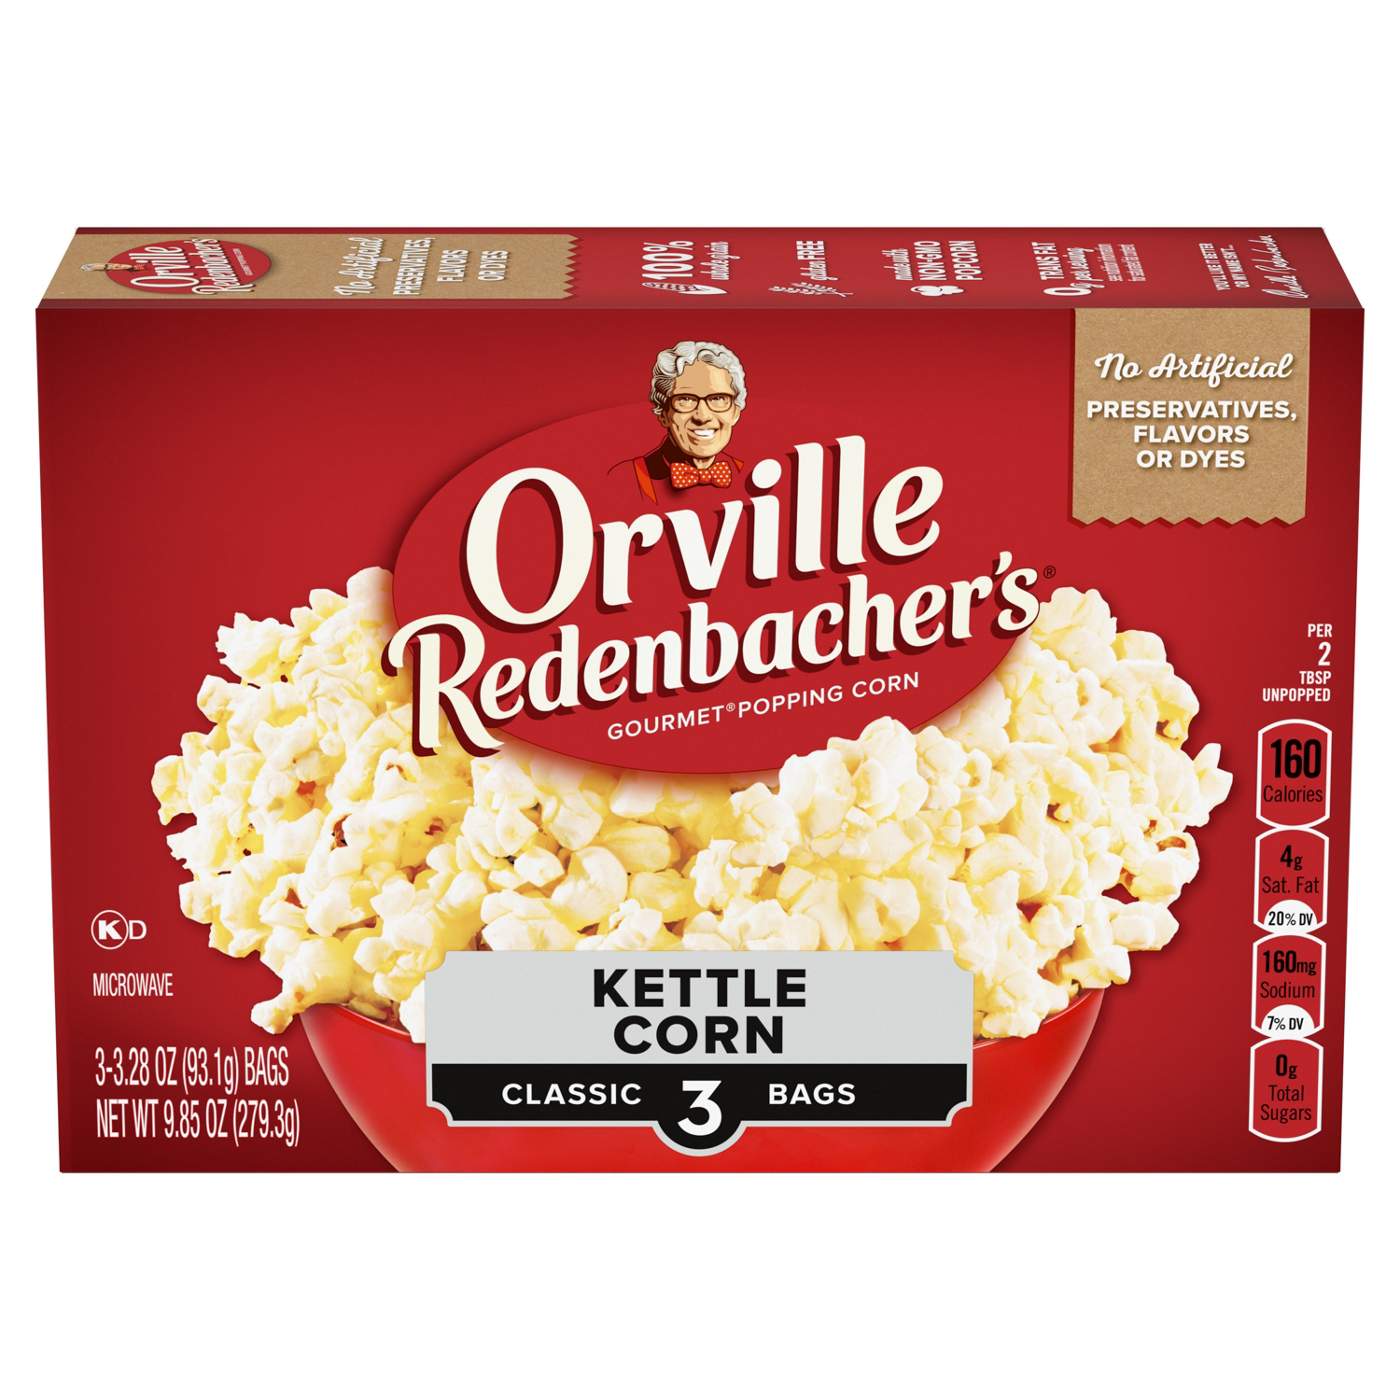 Orville Redenbacher's Microwave Kettle Corn; image 1 of 4